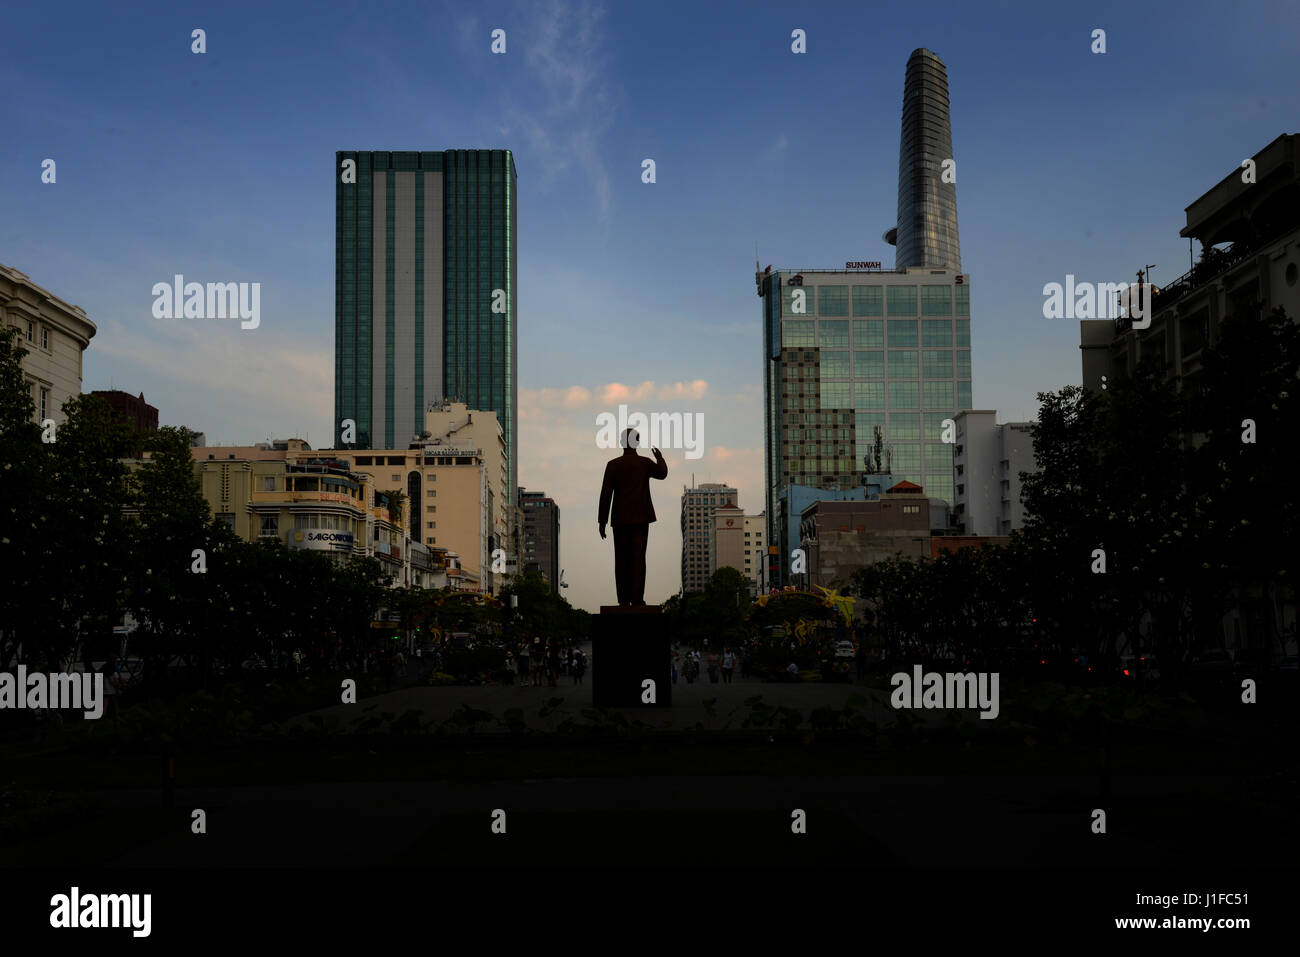 The Silhouetted statue of Ho Chi Minh (Uncle Ho) which stands in Ho Chi Minh Square against the backdrop of the modern Ho Chi Minh city skyline. Stock Photo